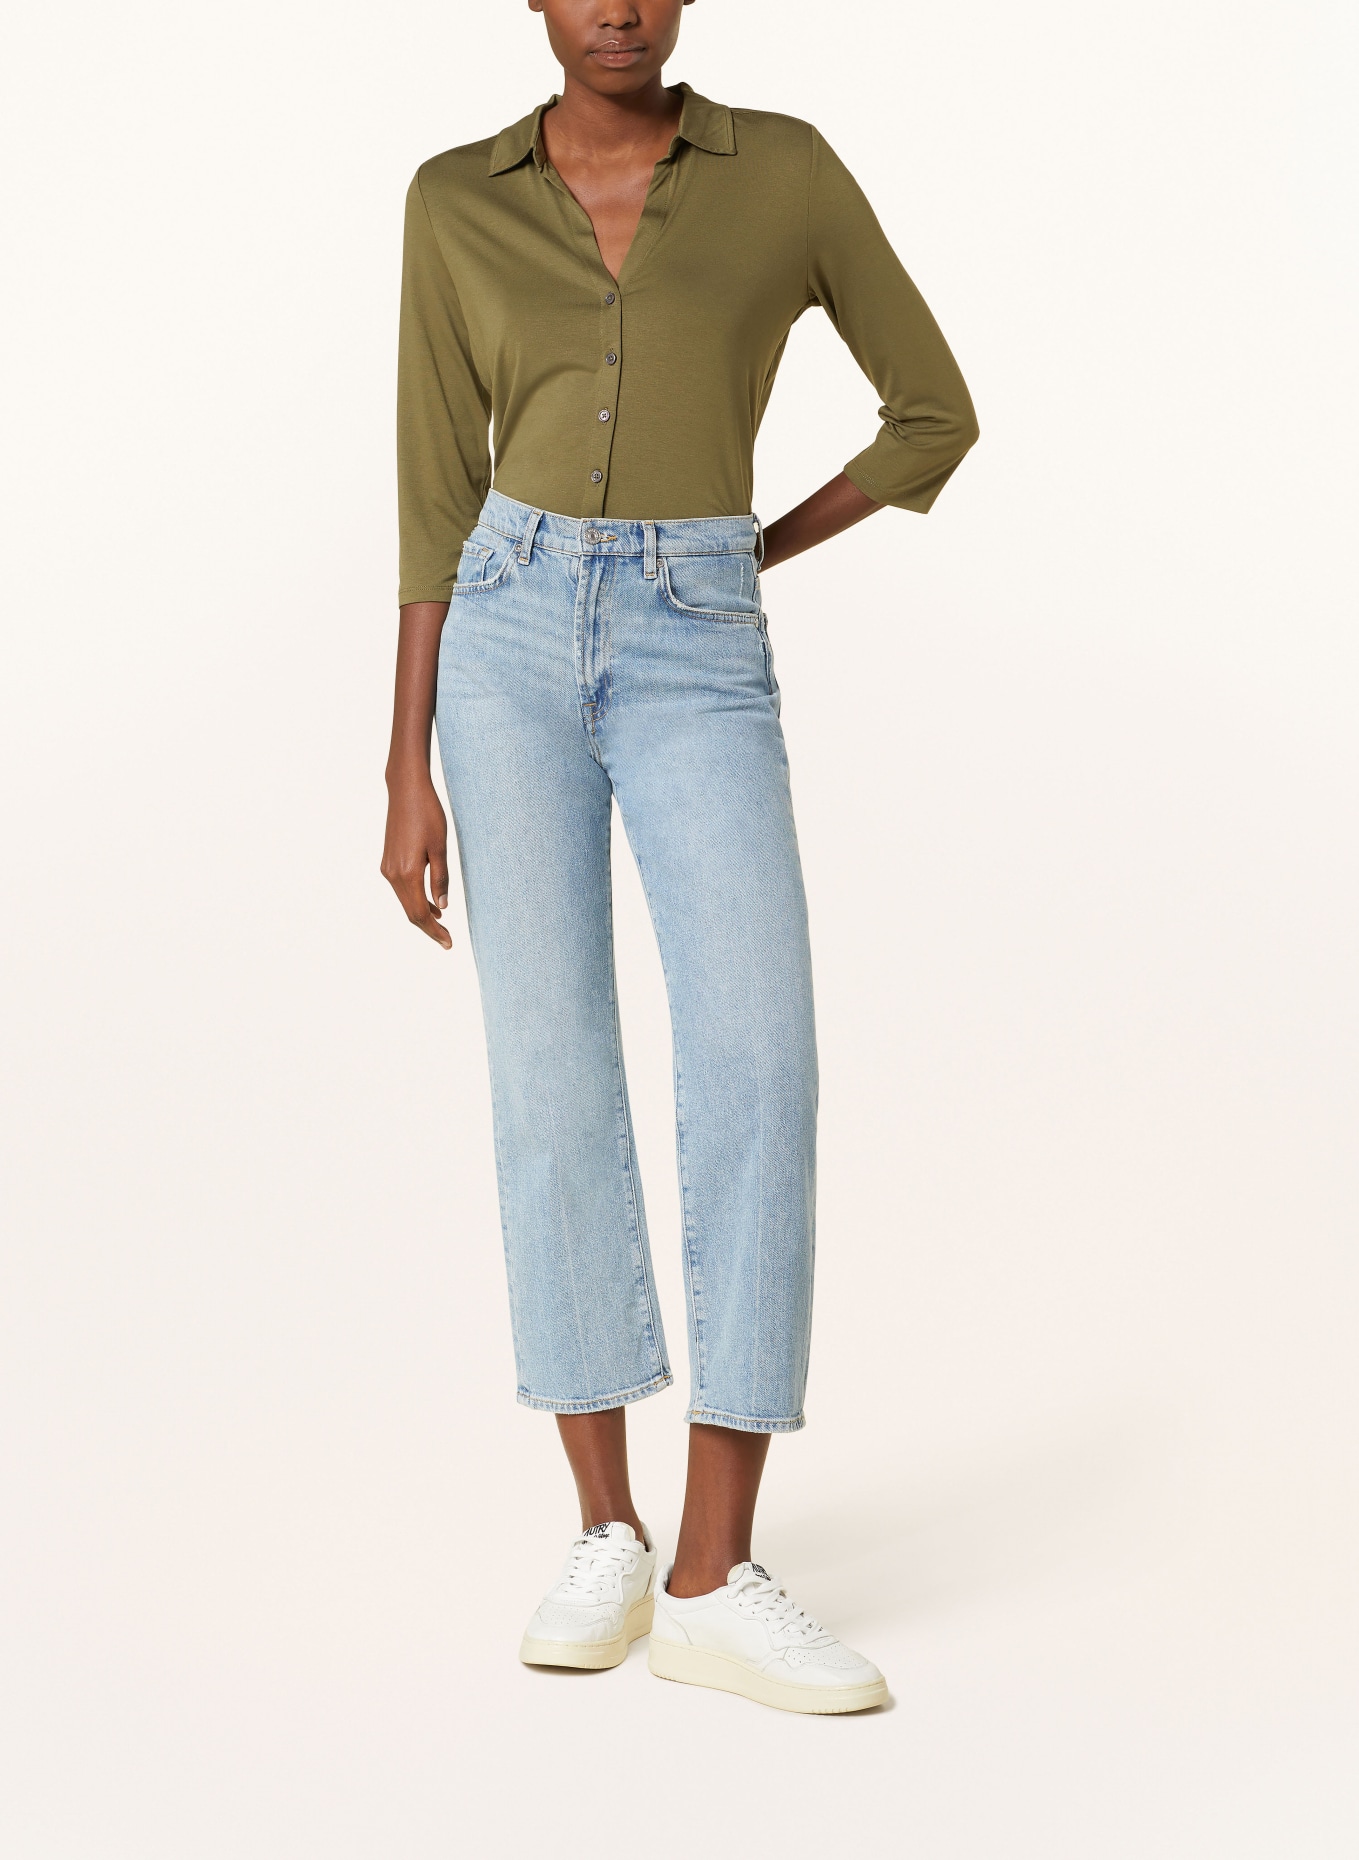 Marc O'Polo Jersey blouse with 3/4 sleeves, Color: OLIVE (Image 2)